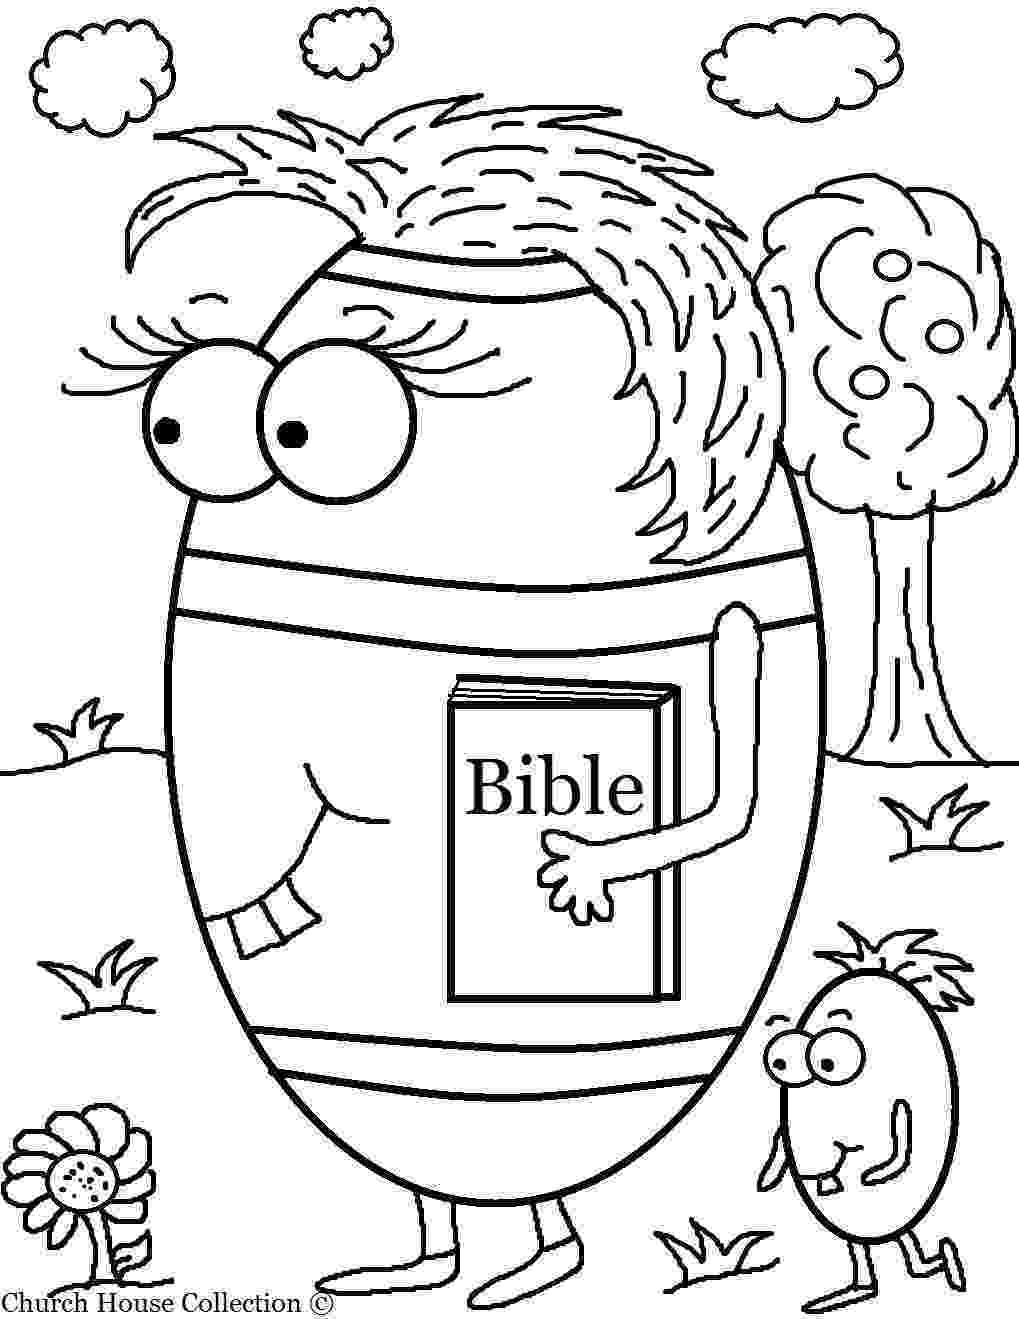 easter coloring pages for childrens church 46 best images about bible coloring pages on pinterest coloring for childrens pages easter church 